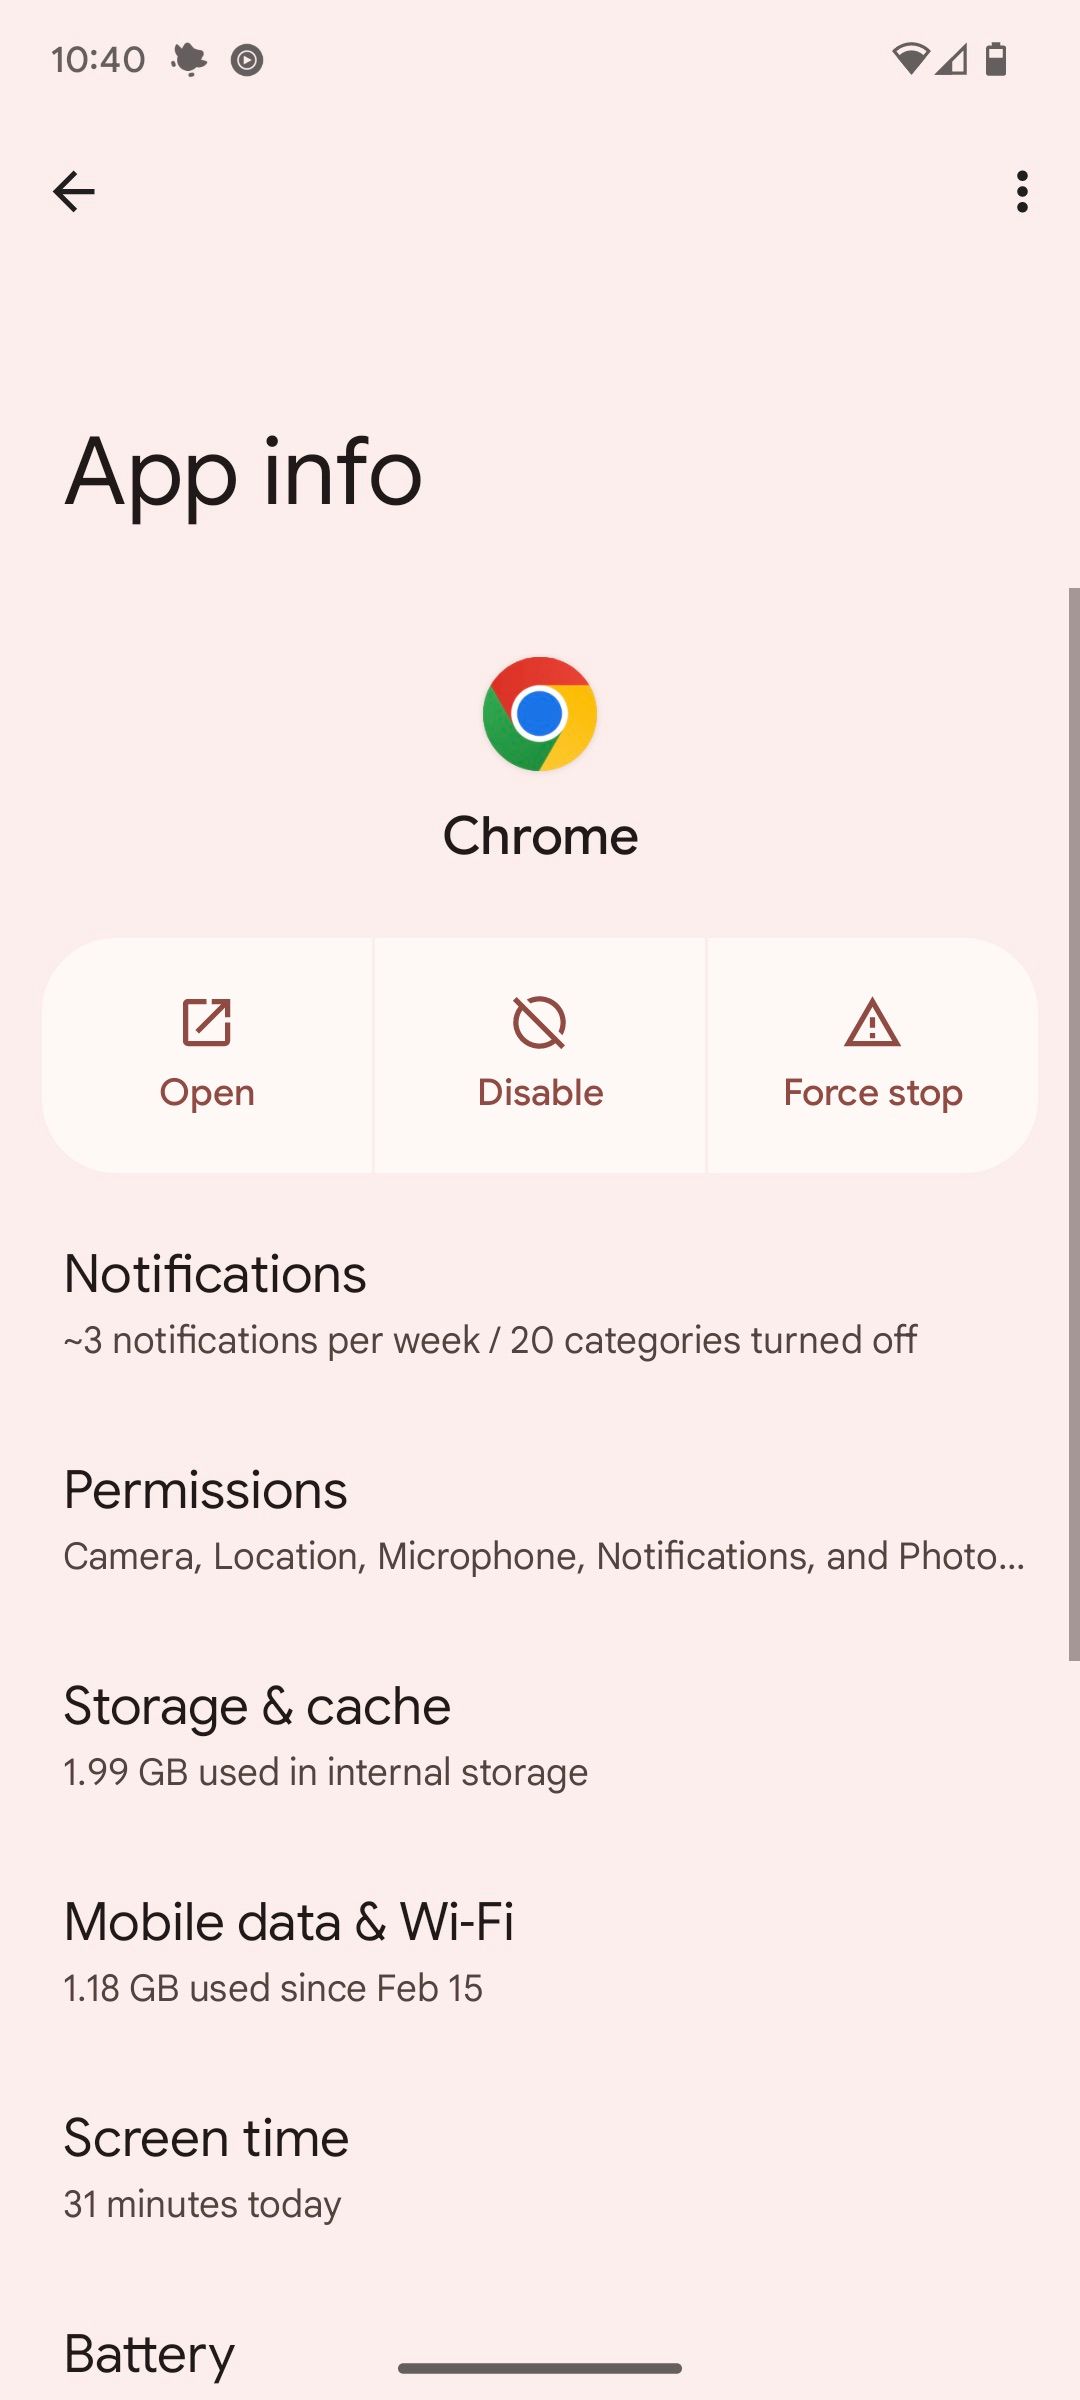 A screenshot of the Pixel notifications settings menu with a pastel orange background.